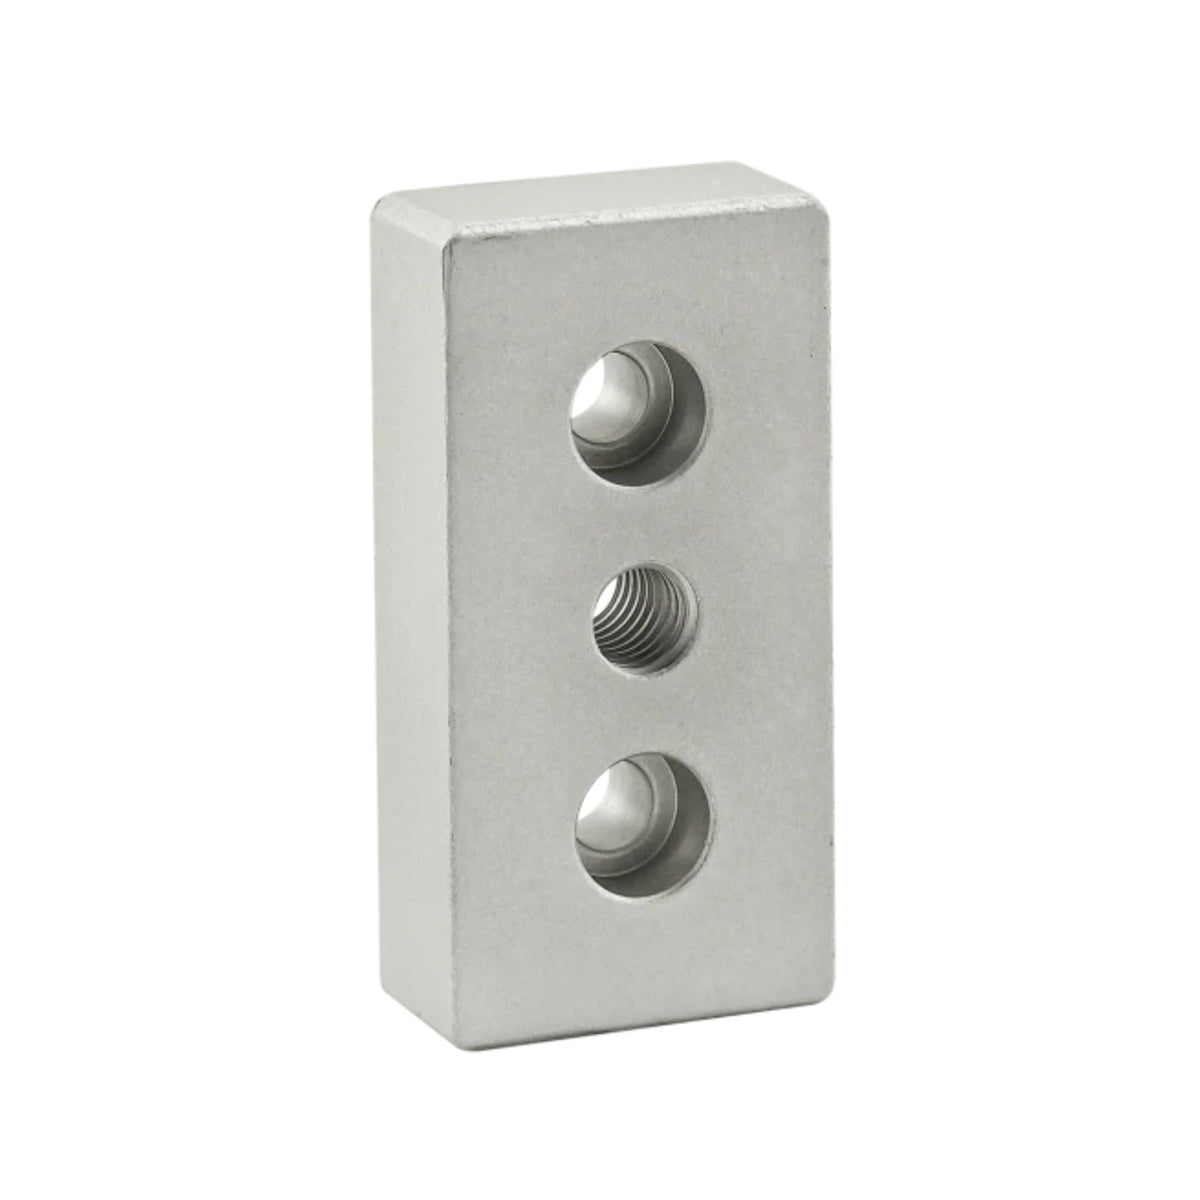 upright, rectangular, aluminum block with three holes vertically along with center